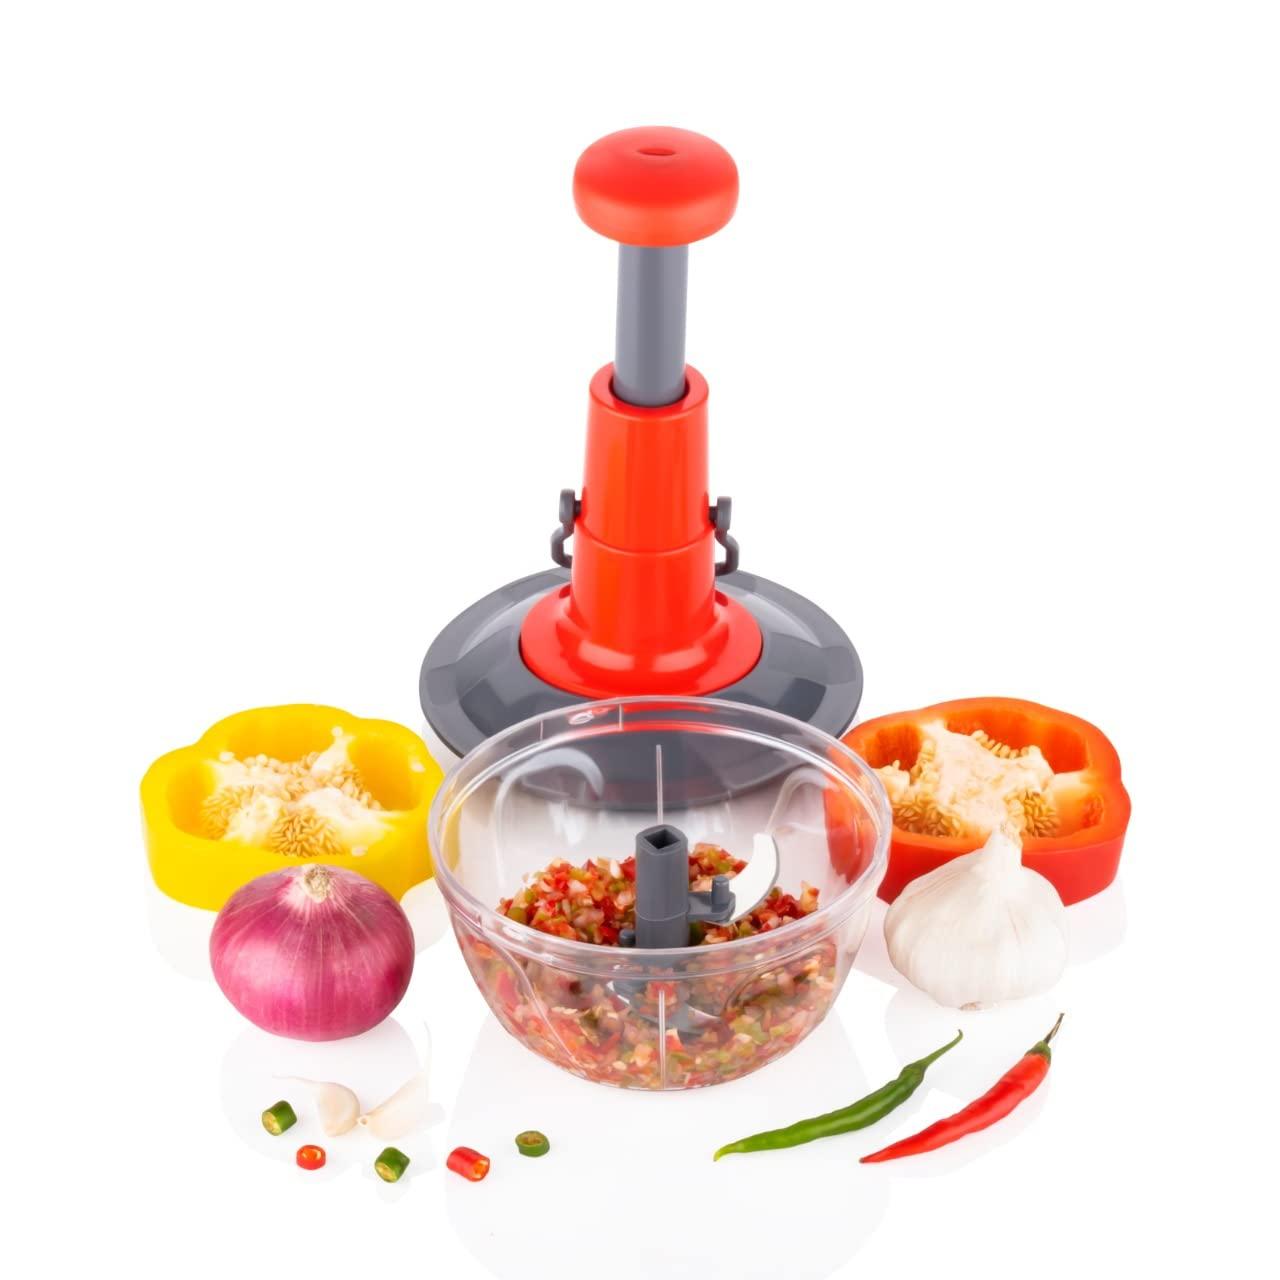 Manual Speedy Hand Press Food Chopper for Vegetables, Fruits, Nuts and More-Egg Whisk-Perfect Chopping with Easy Push and Close Button 1100 ml